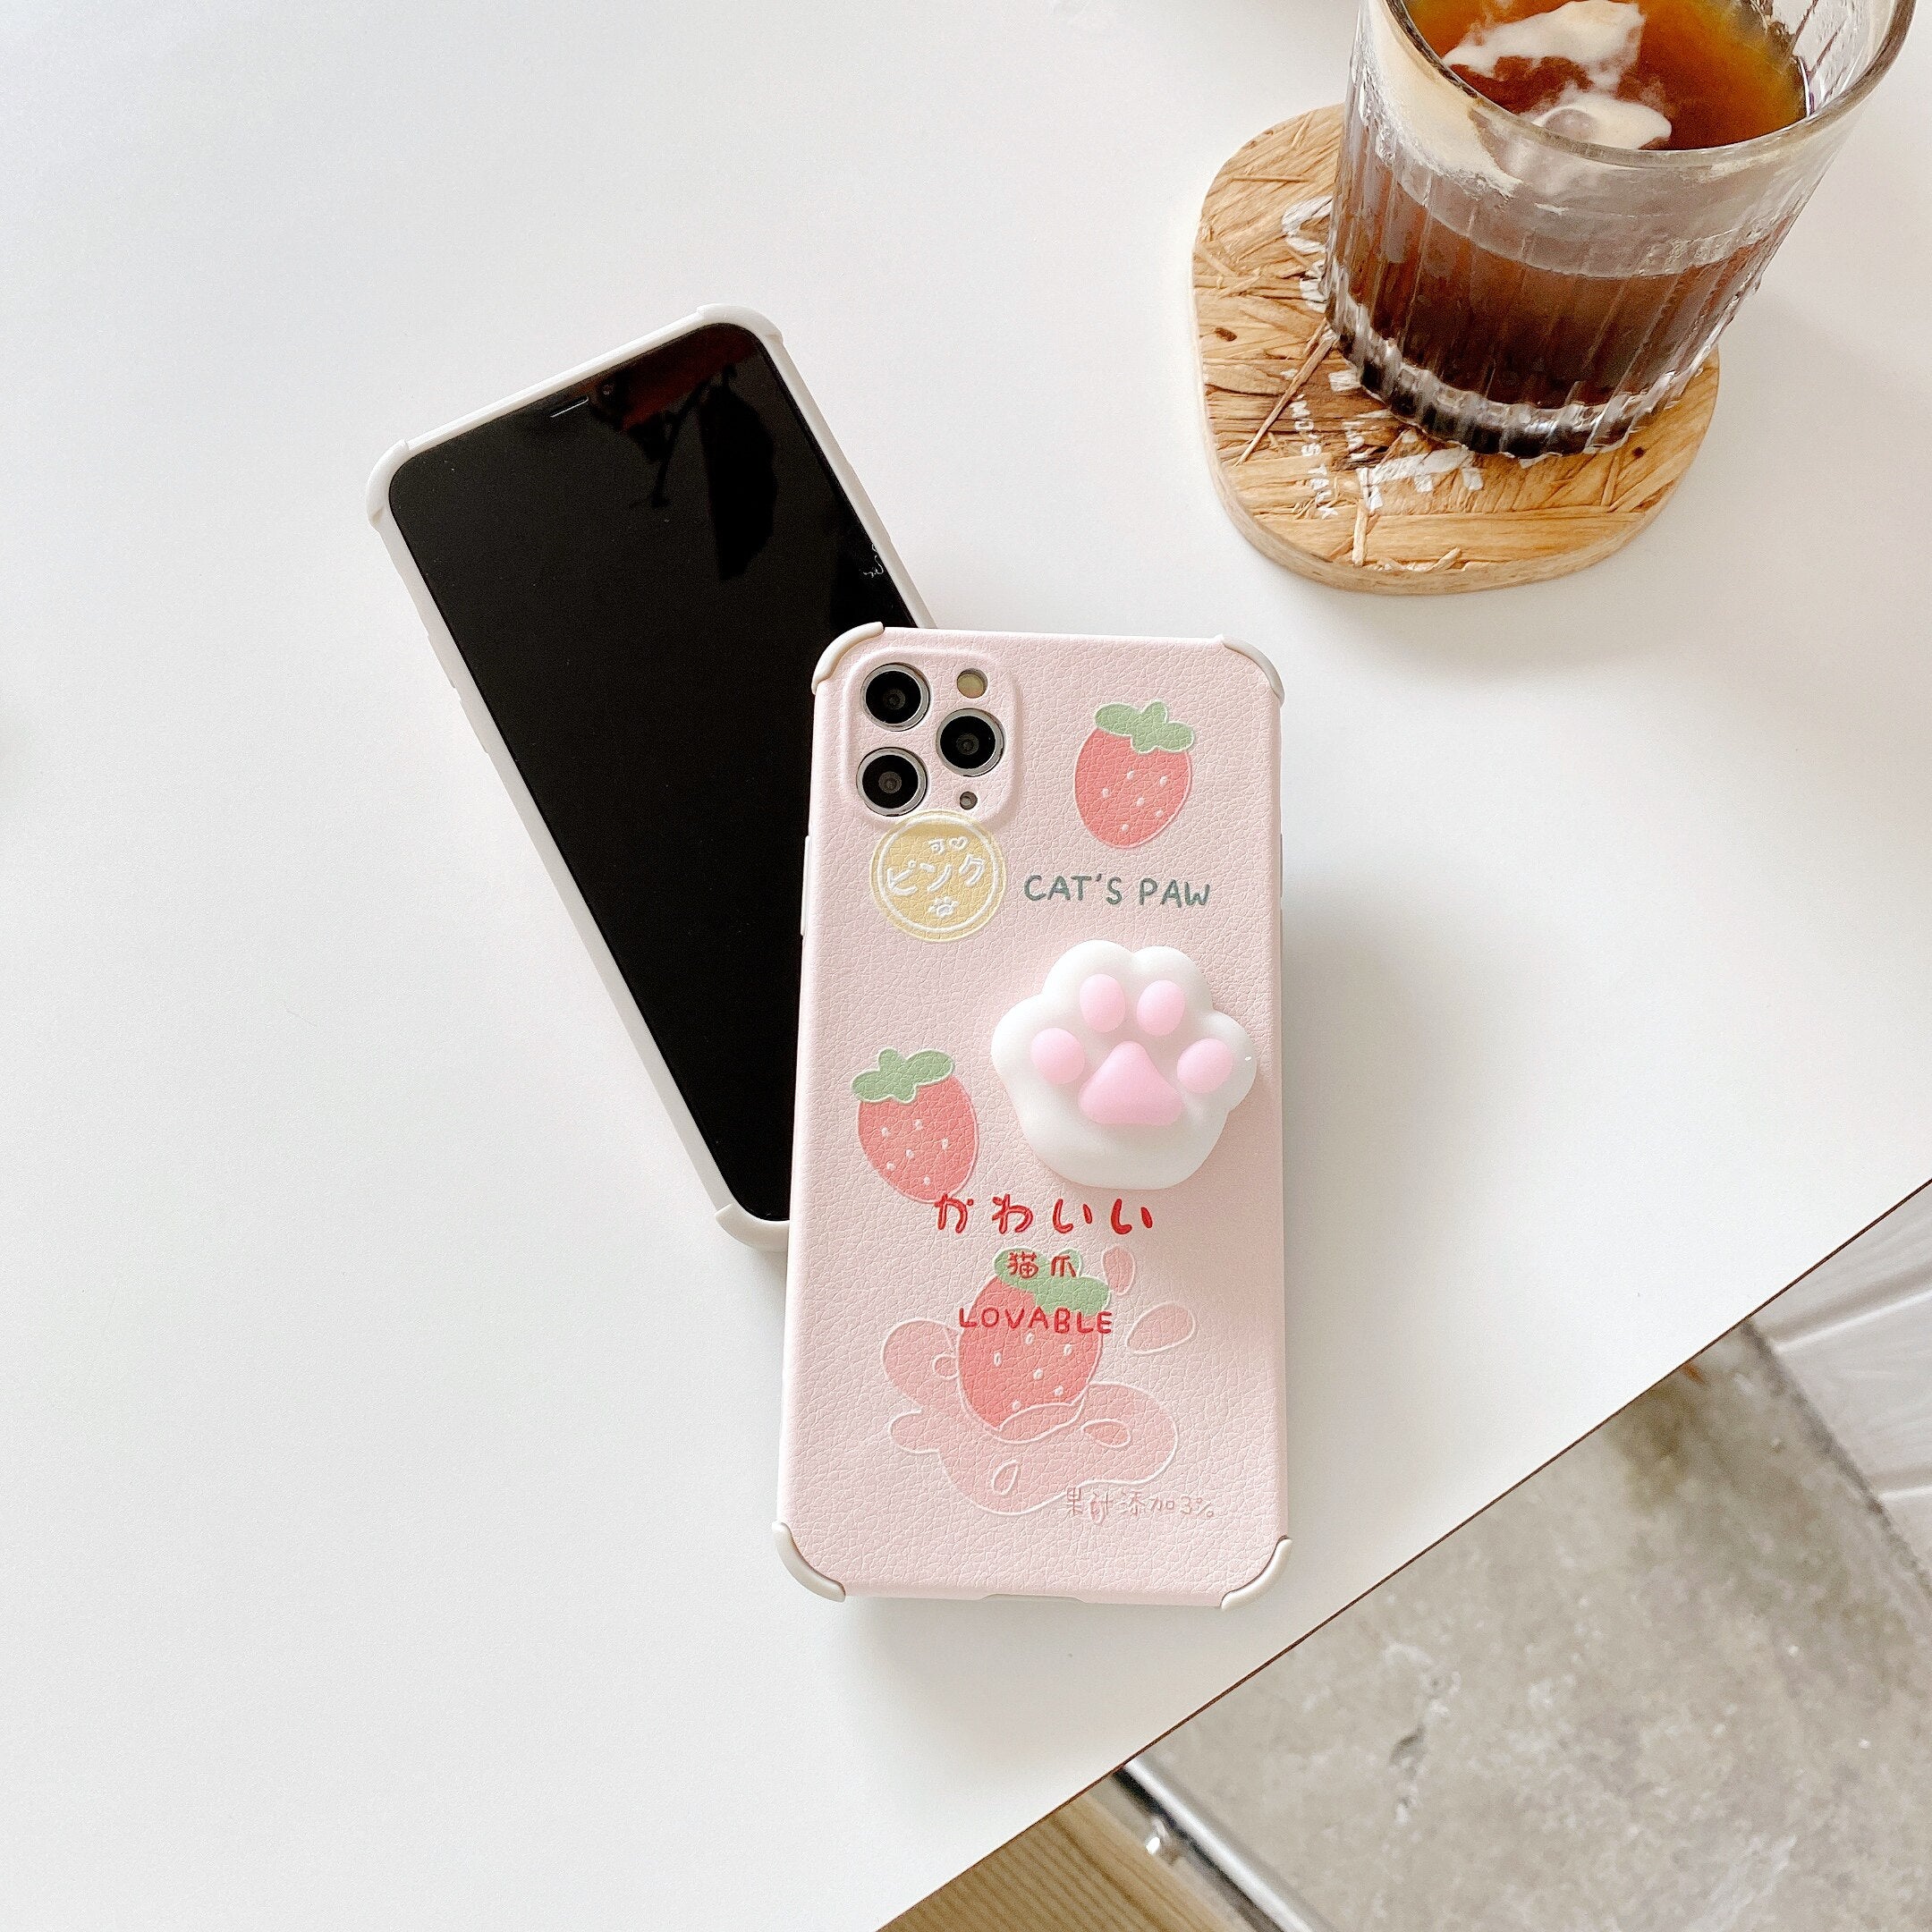 3D Squishy finger pinch Cat paw Pink Phone Case For iPhone【Buy One Get One Today!】